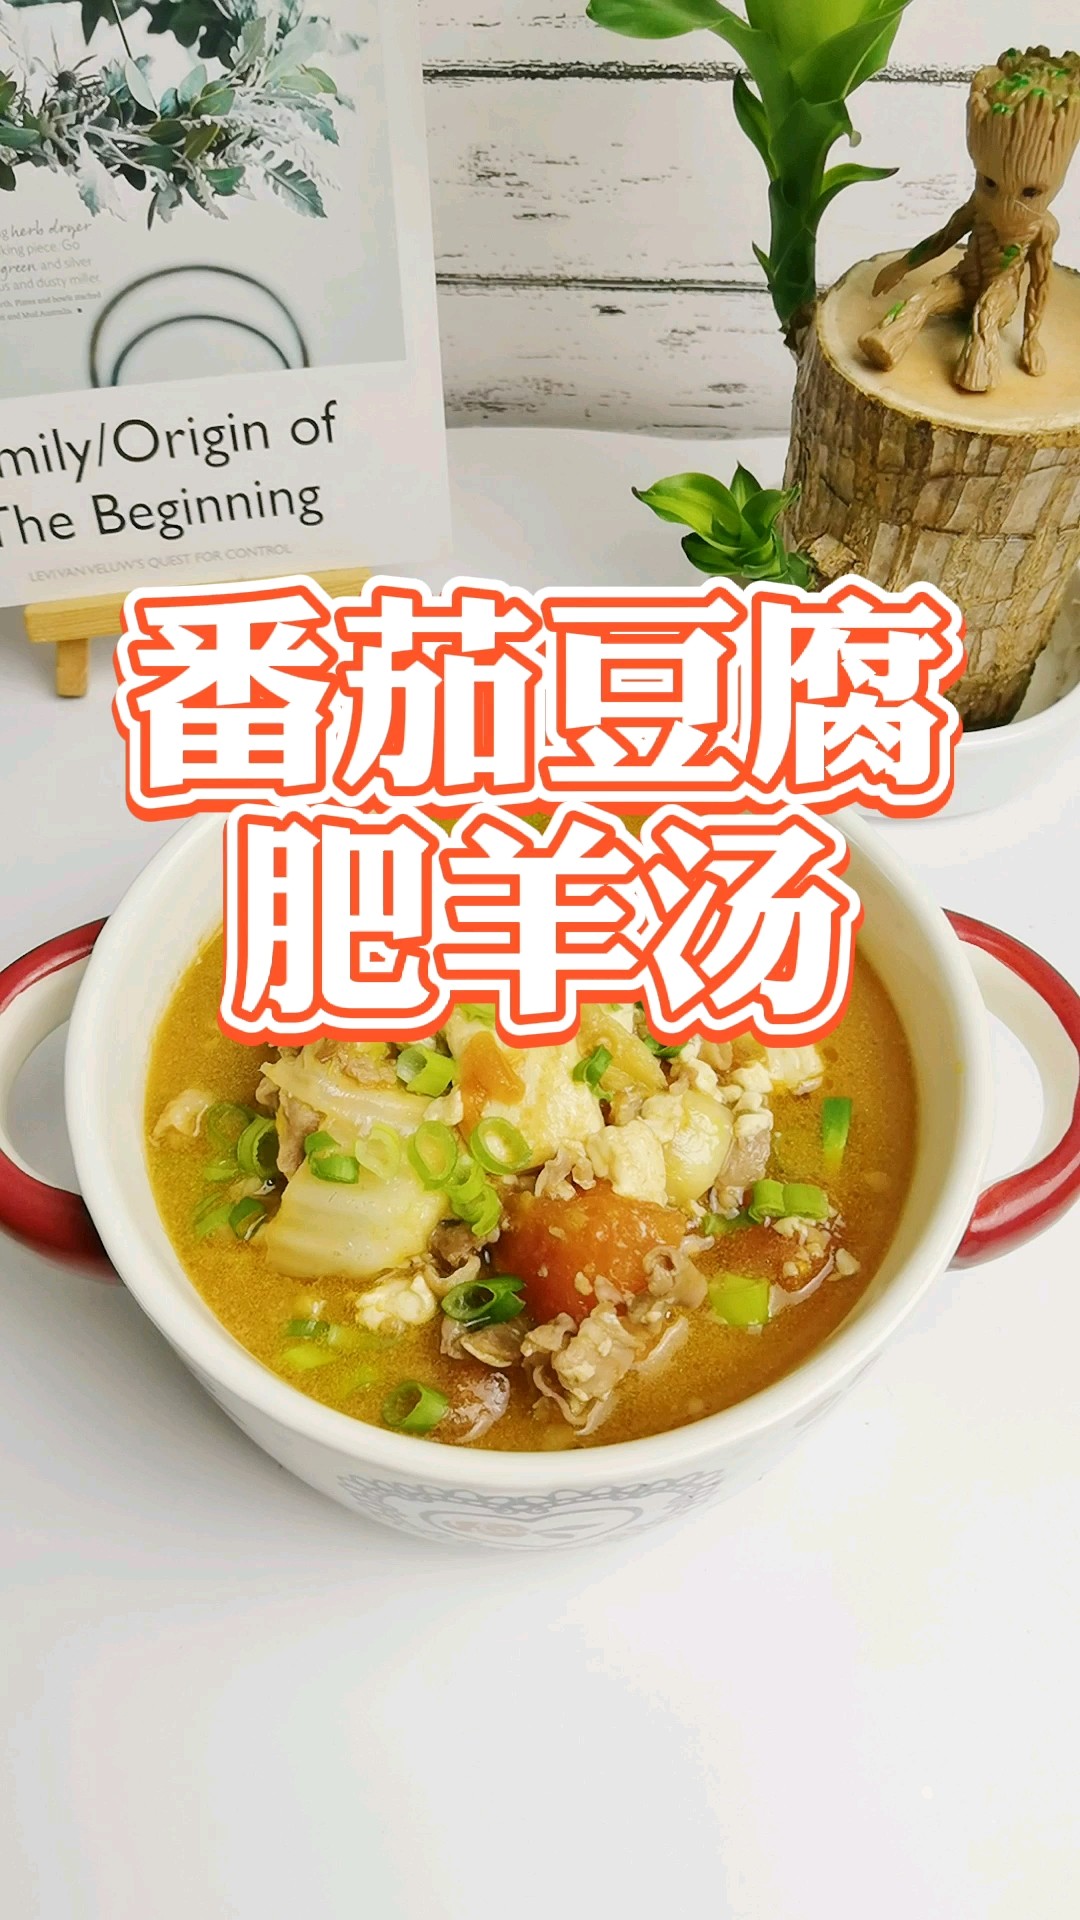 It’s Cold and Warm, So Make A Soup for Your Family-tomato Tofu Fat Lamb